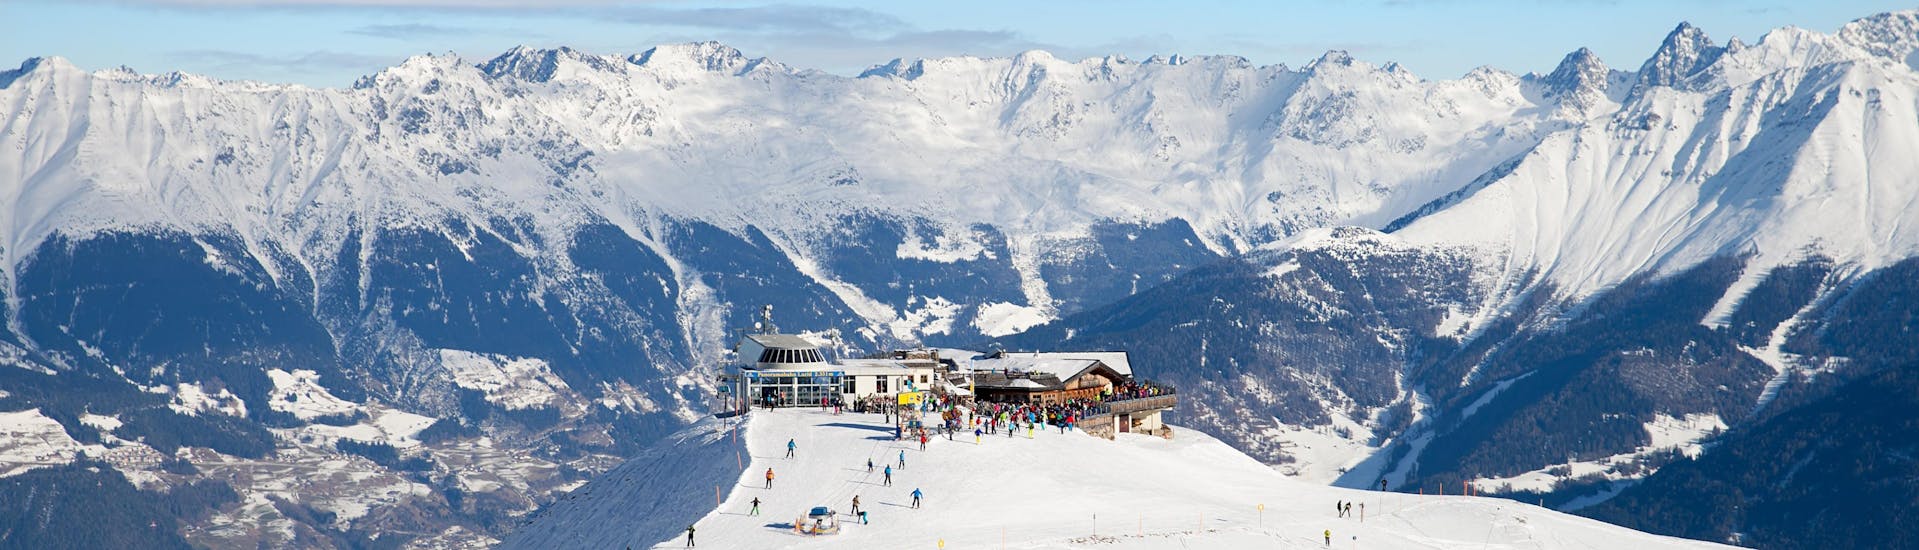 Image of the panoramic view from the Lazidbahn in the ski resort Serfaus-Fiss-Ladis.